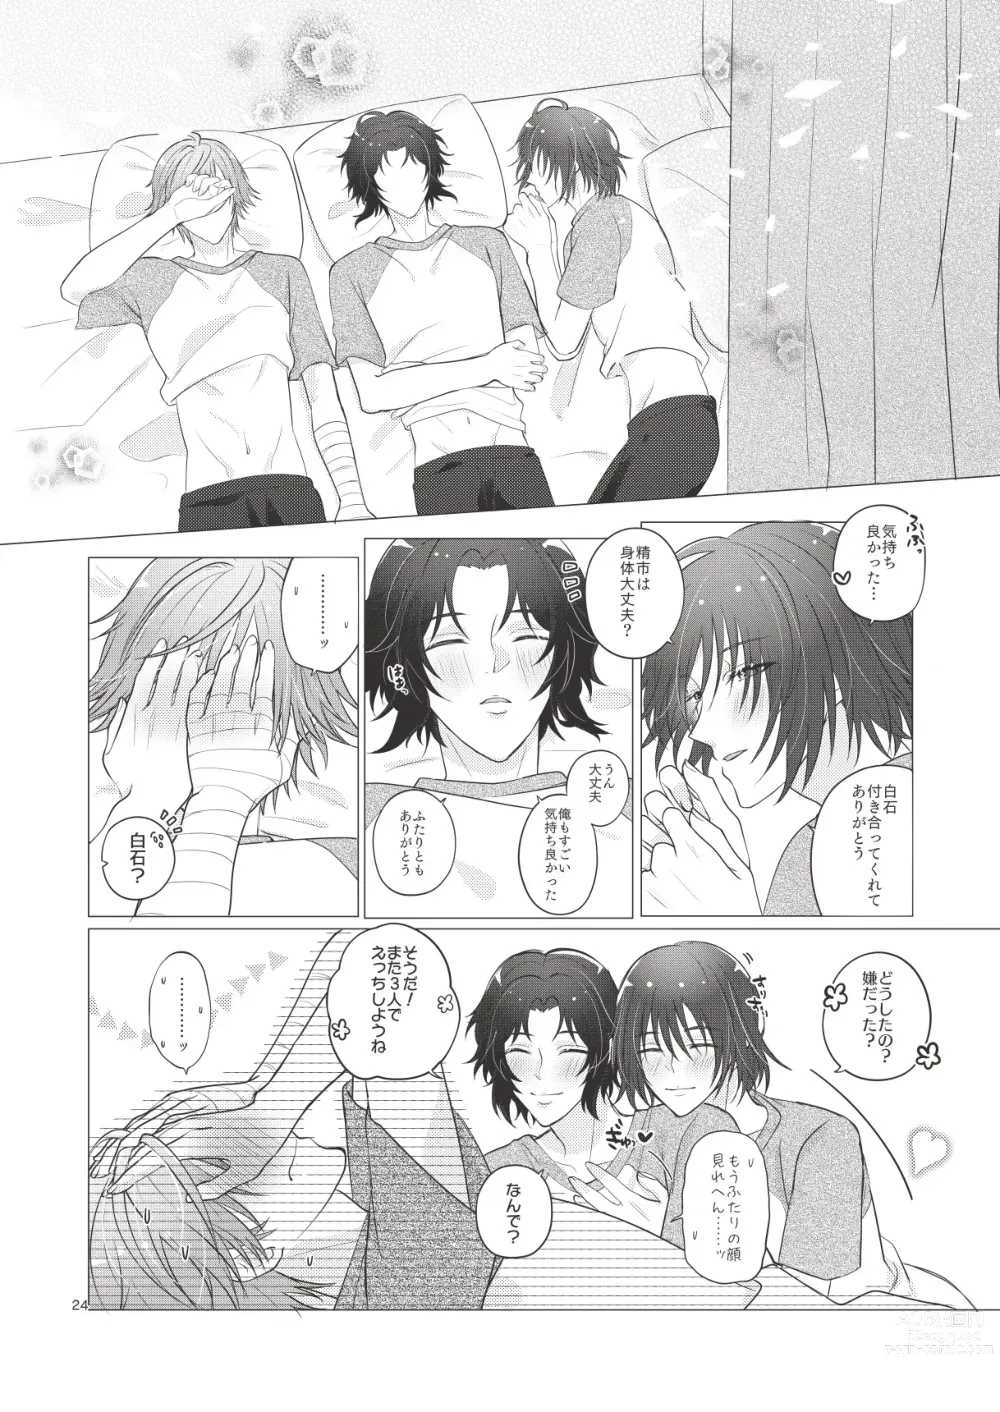 Page 23 of doujinshi Bonds of affection